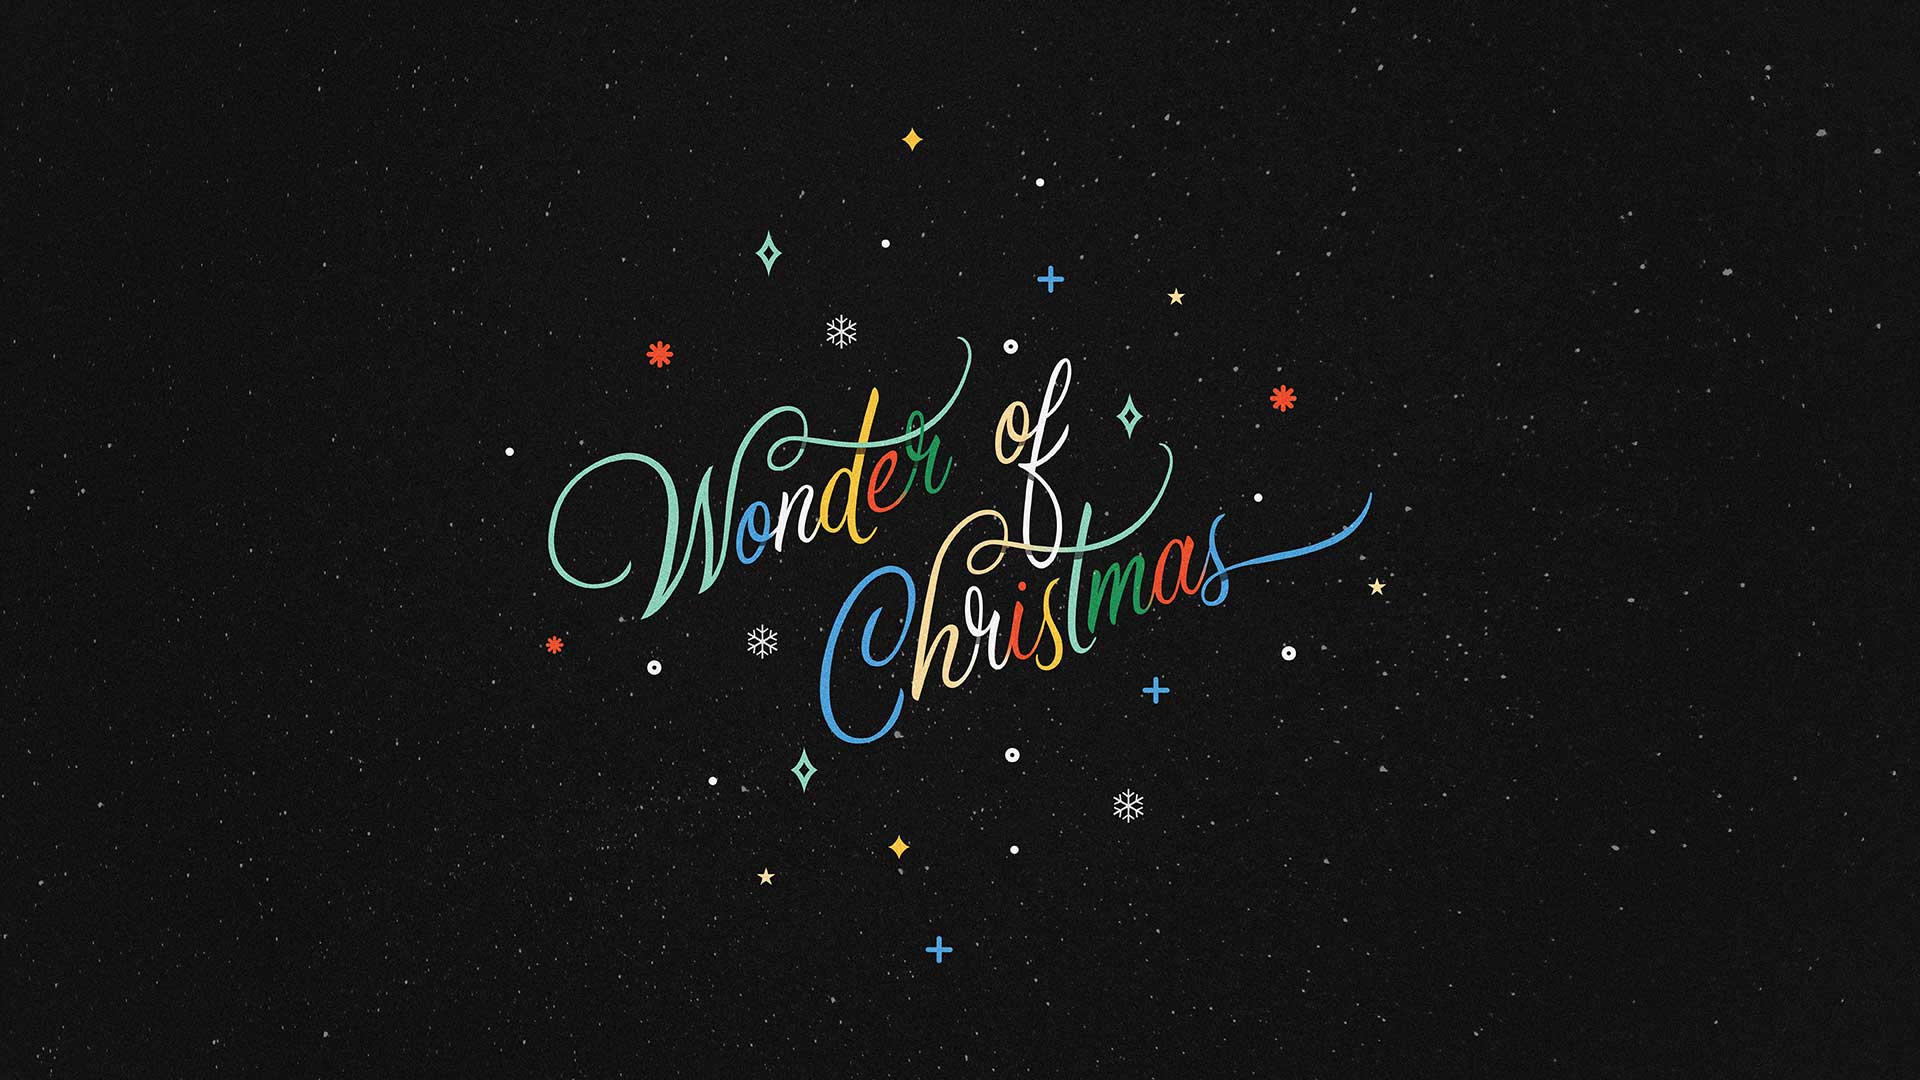 Experience the Wonder of Christmas – Online